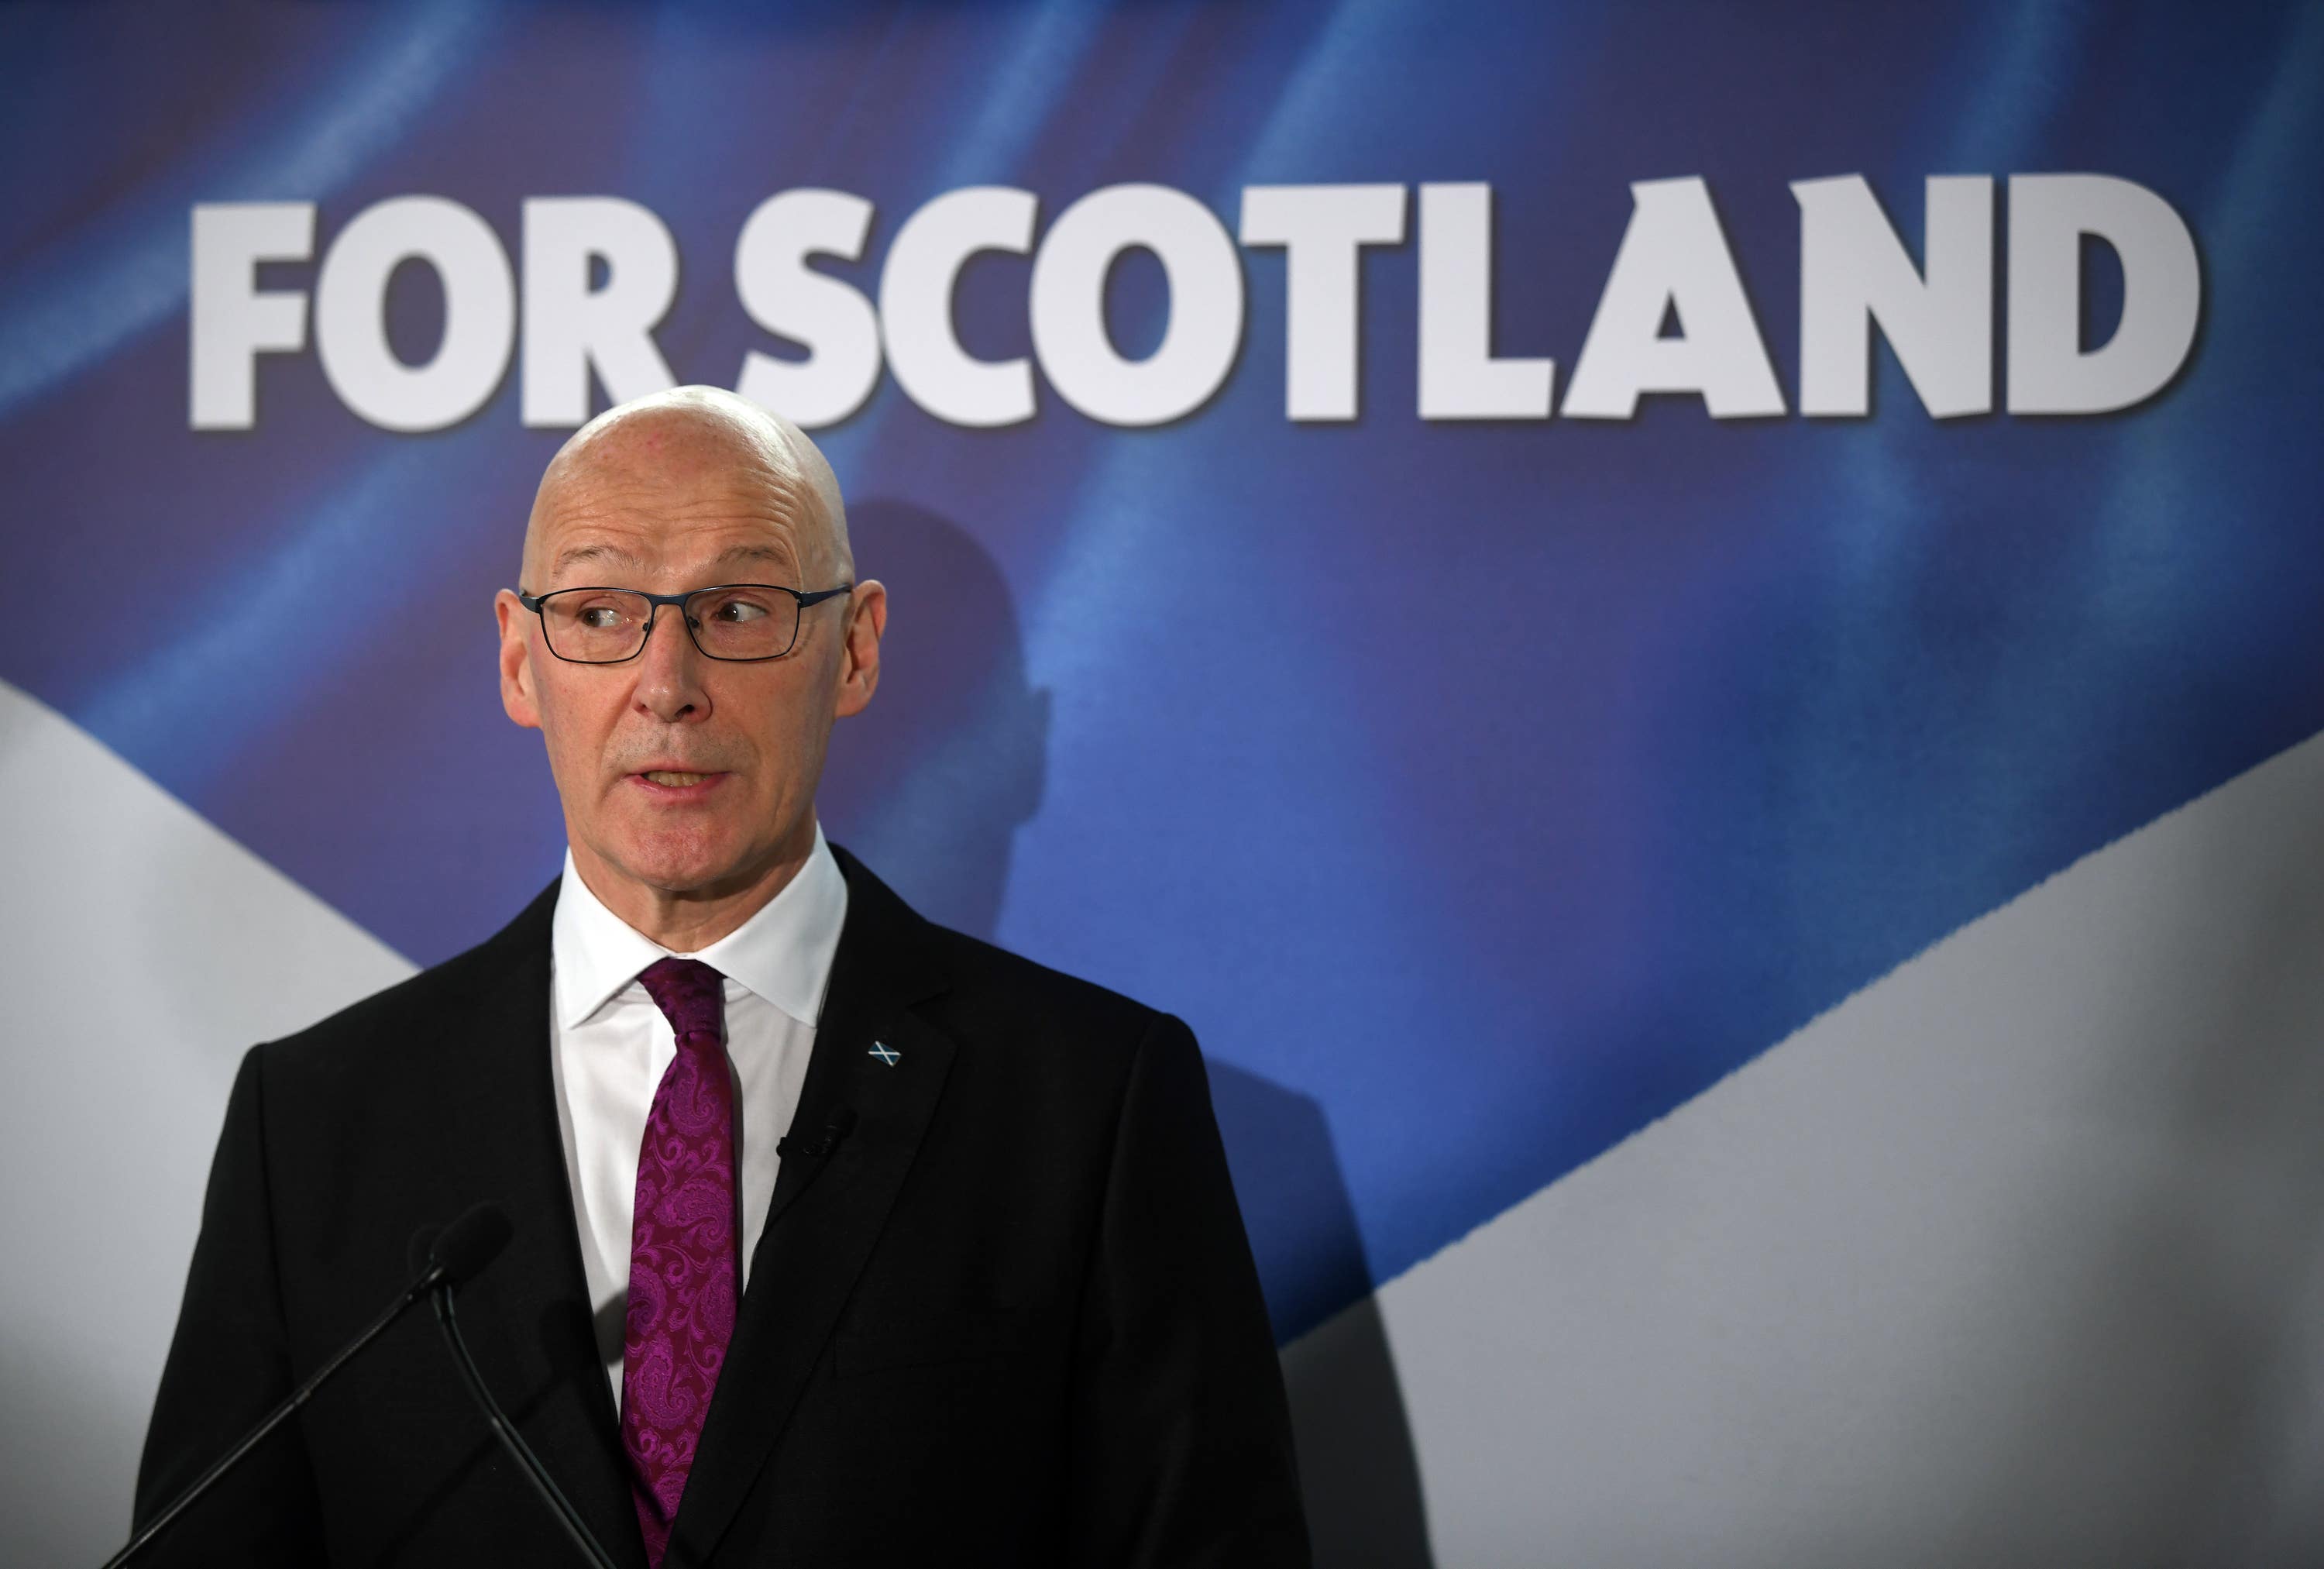 Keir Starmer said the ‘only ambition’ of SNP – led by John Swinney – is to ‘break up the UK’.